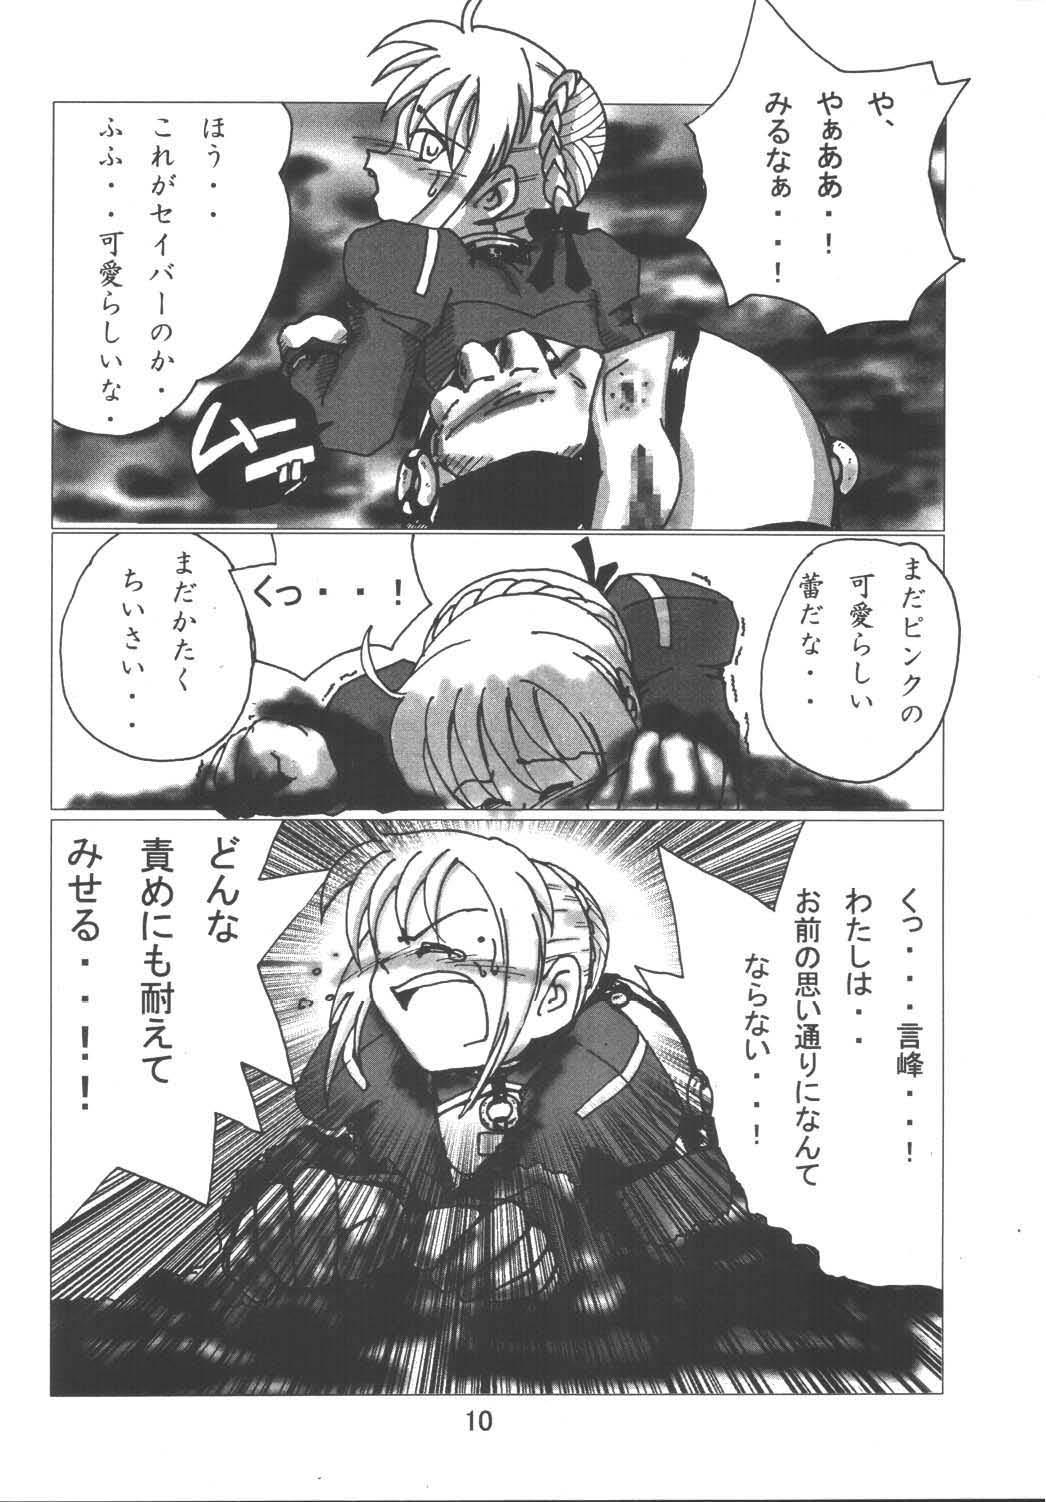 Orgasms Fate Nightmare For Saber - Fate stay night British - Page 10